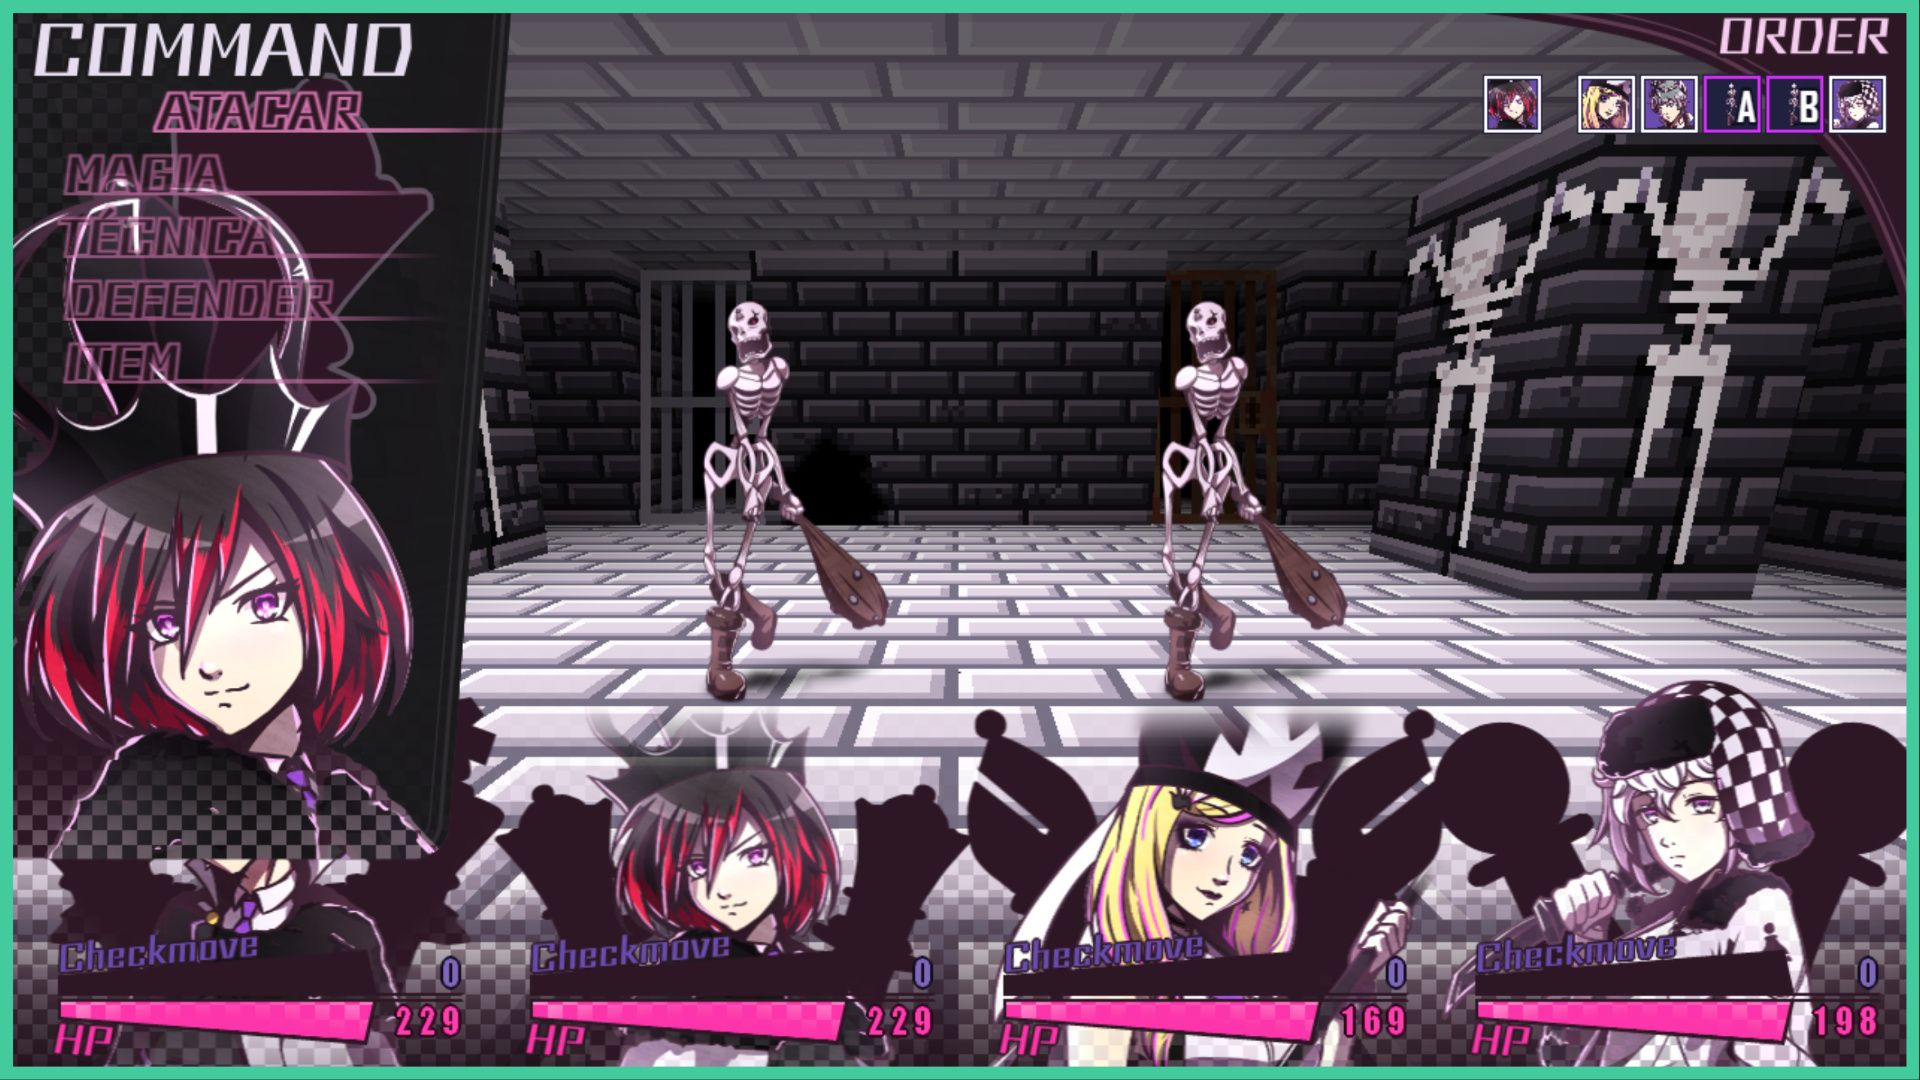 feature image for our exodus checkmate news, the image features a screenshot of combat from the game, with three character portraits from the party at the bottom with their HP levels, there is a small pop up at the side called "command" which features the turn-based moves, as the rest of the image is of the stone dungeon as two skeletons stand with clubs